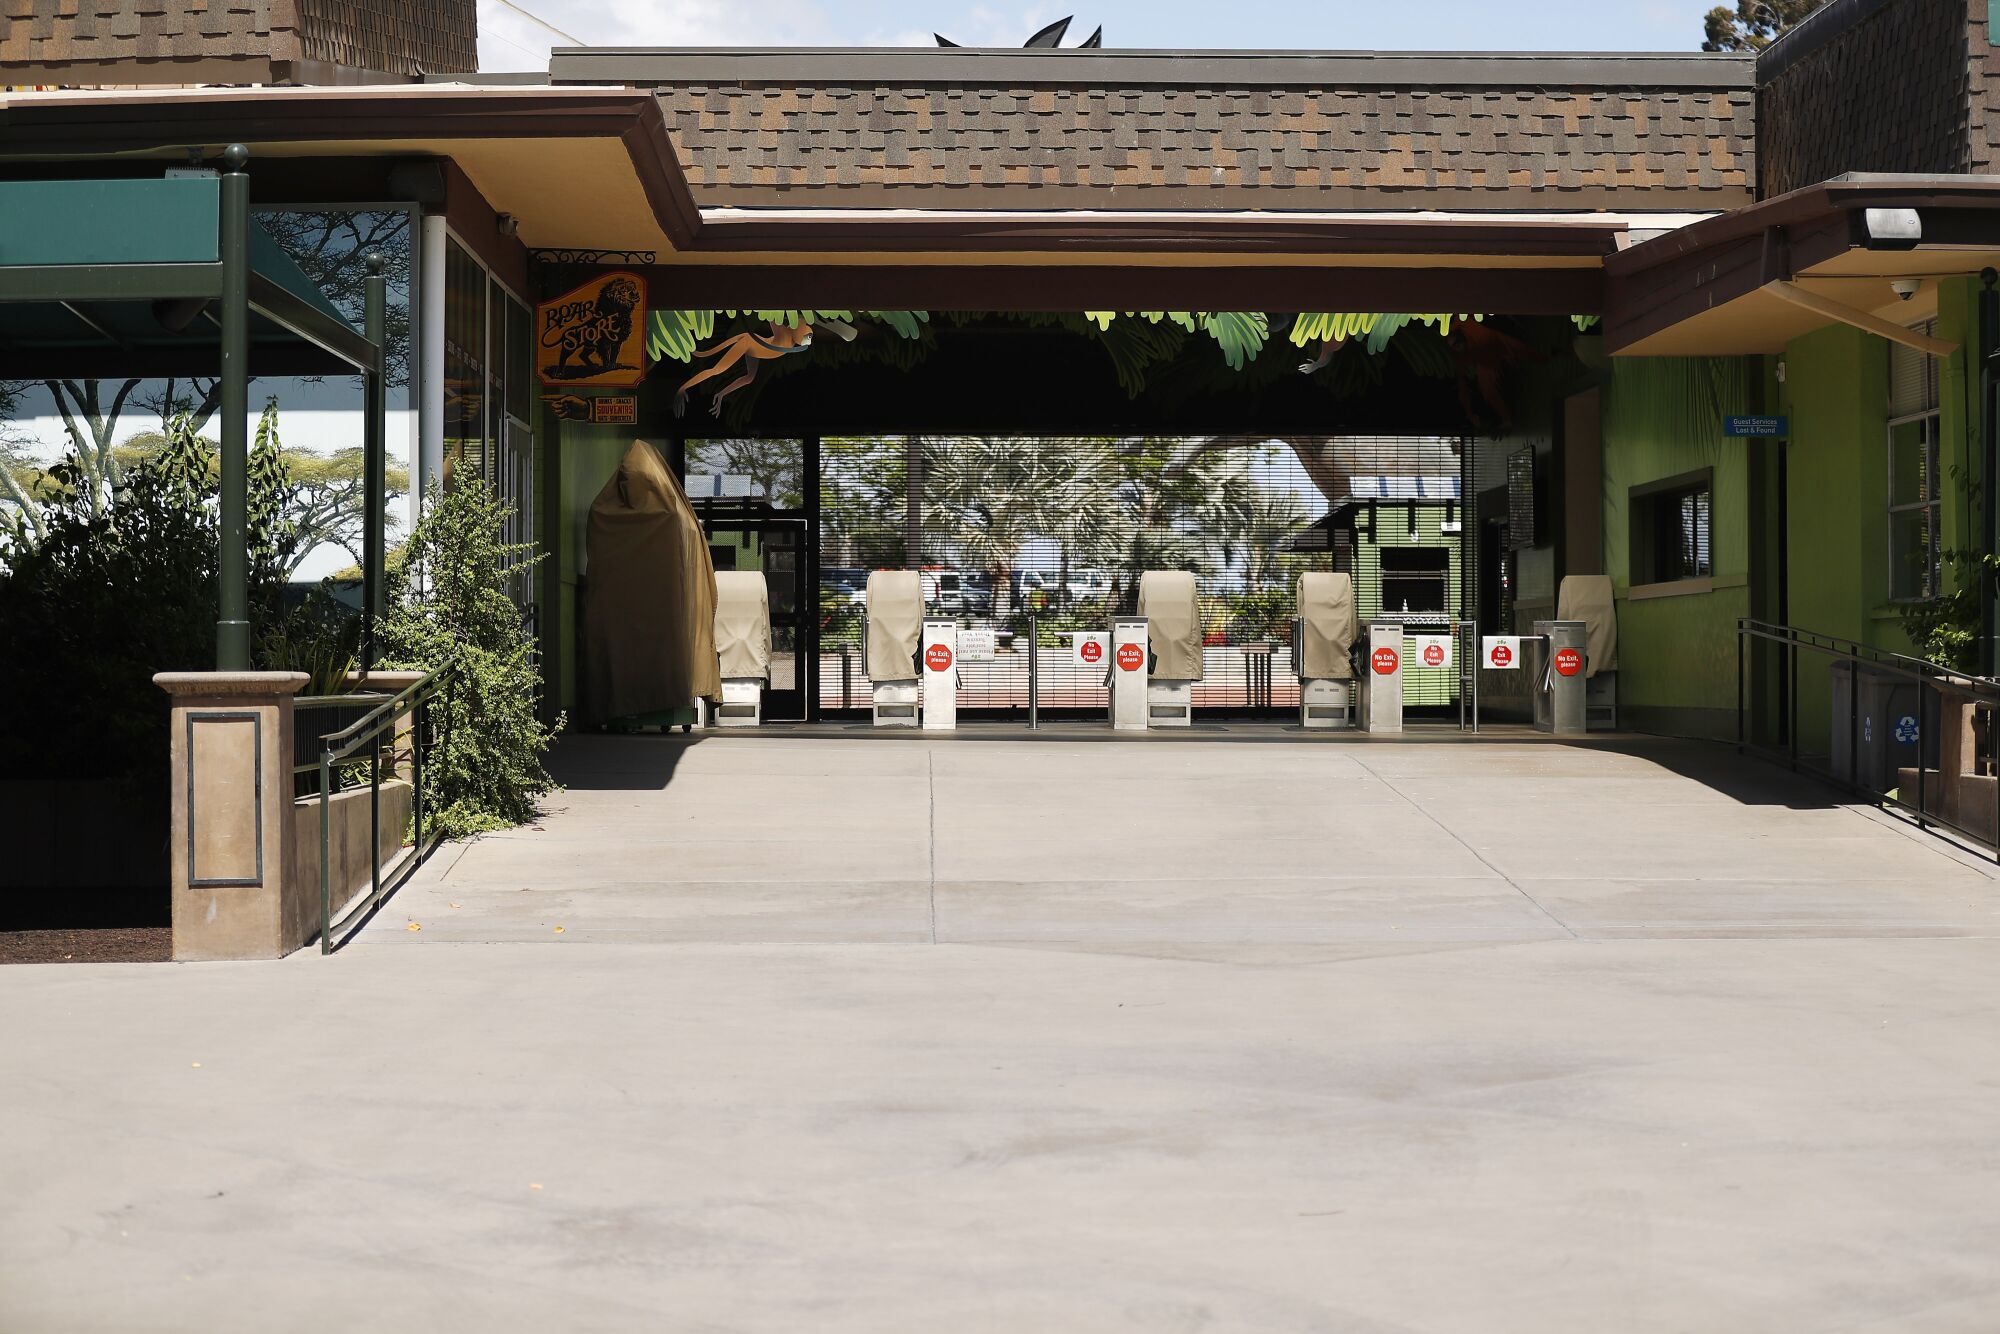 The San Diego Zoo entrance sits empty on May 19, 2020.